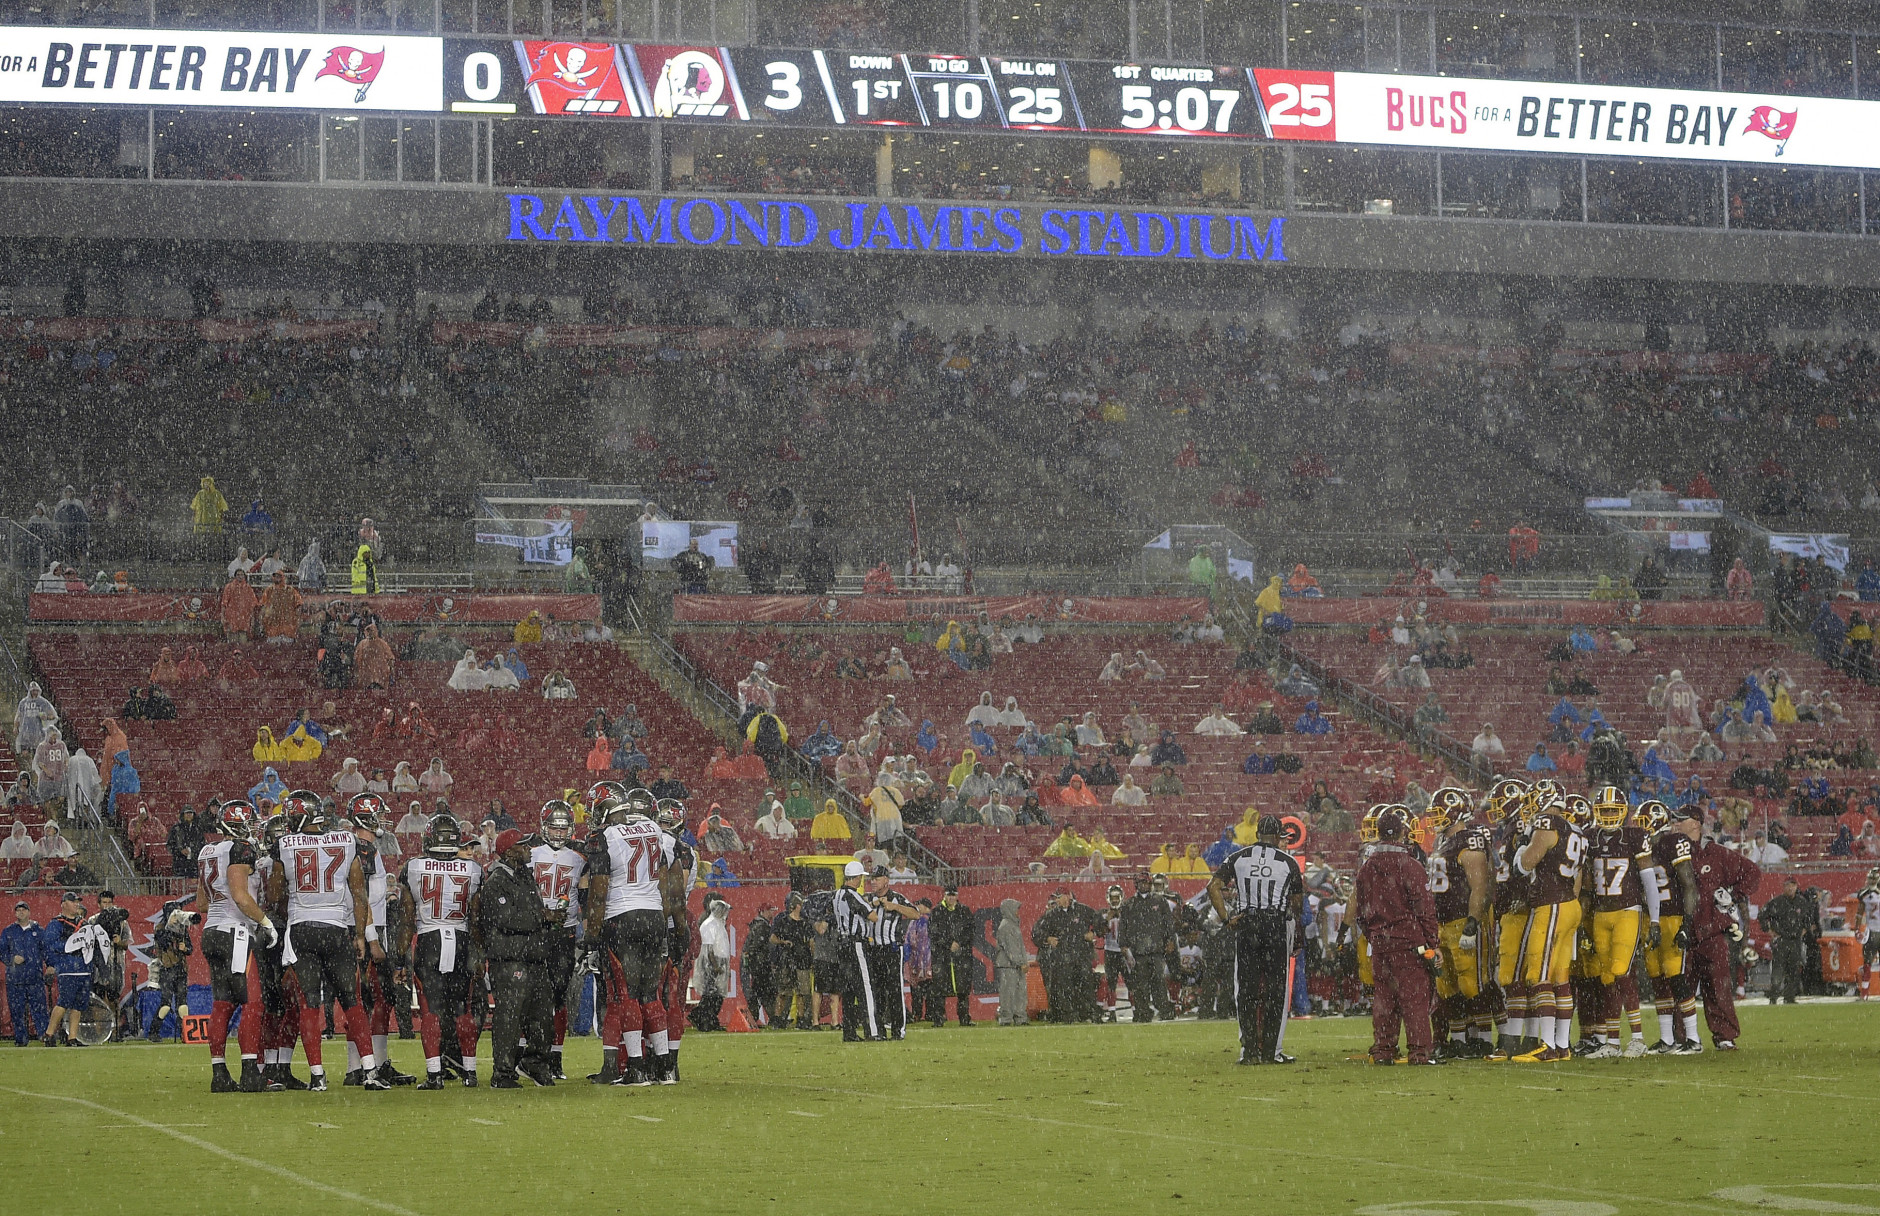 The Tampa Bay Buccaneers and Washington Redskins play each other in a driving rain storm from tropical storm Hermine during the first quarter of an NFL preseason football game Wednesday, Aug. 31, 2016, in Tampa, Fla. (AP Photo/Phelan M. Ebenhack)